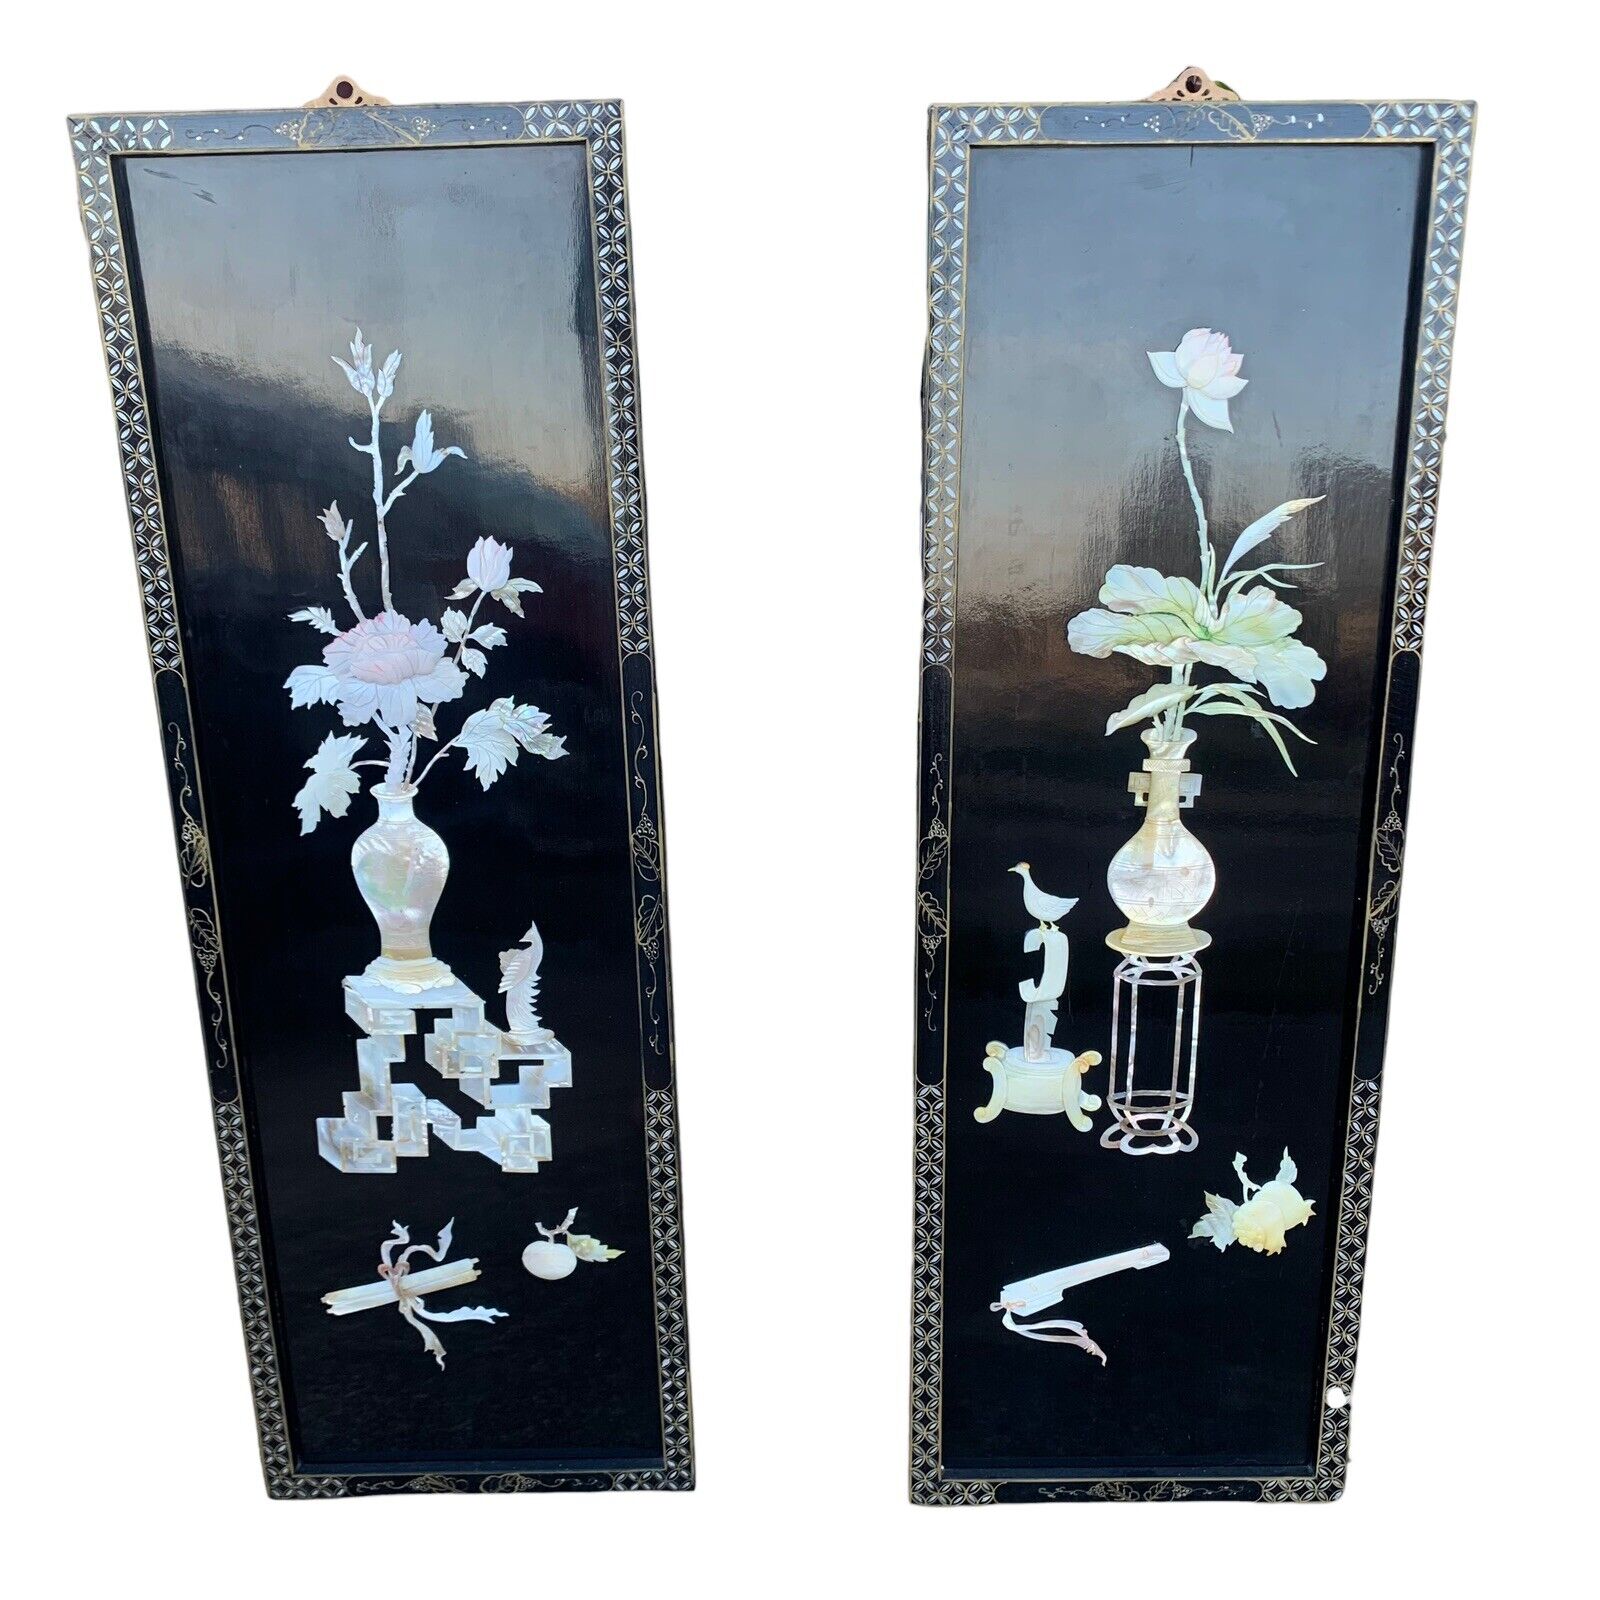 Antique Oriental Floral Birds Mother of Pearl Inlaid Black Lacquer Wall Art. 2pc